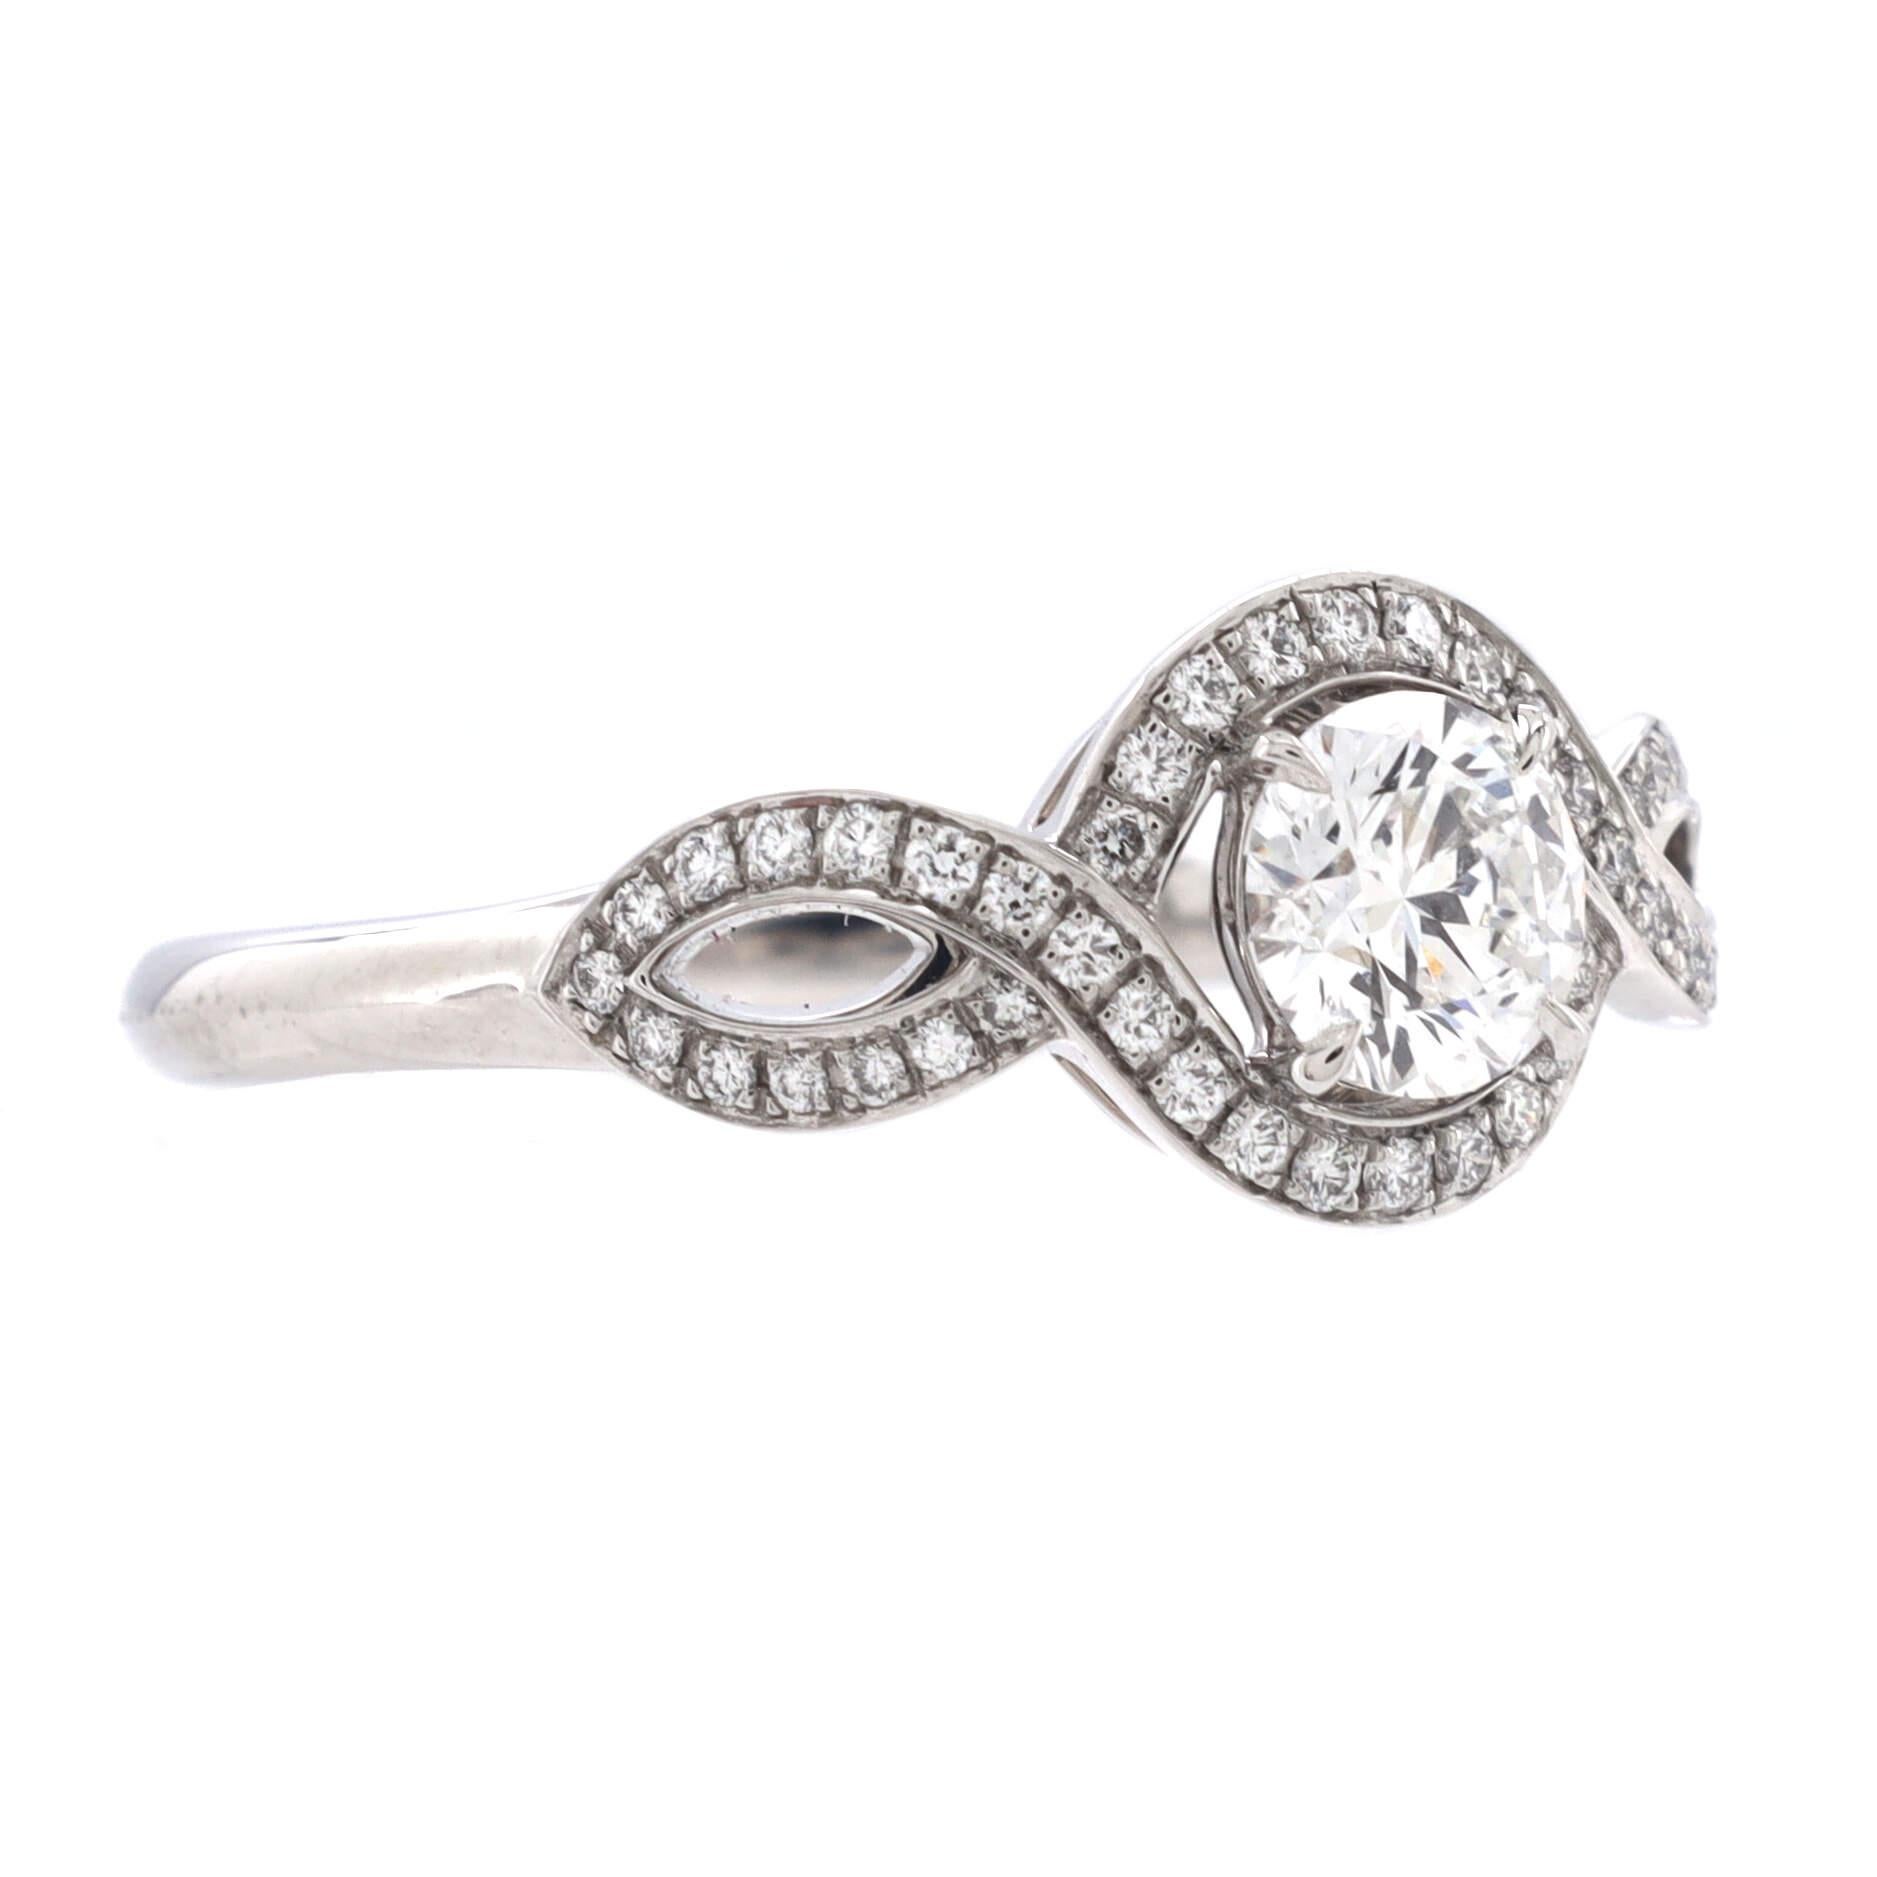 Condition: Excellent. Faint wear throughout.
Accessories: No Accessories
Measurements: Size: 6, Width: 1.95 mm
Designer: Harry Winston
Model: Lily Cluster Ring Platinum with RBC Diamond 0.53CT
Exterior Color: Silver
Item Number: 185543/8